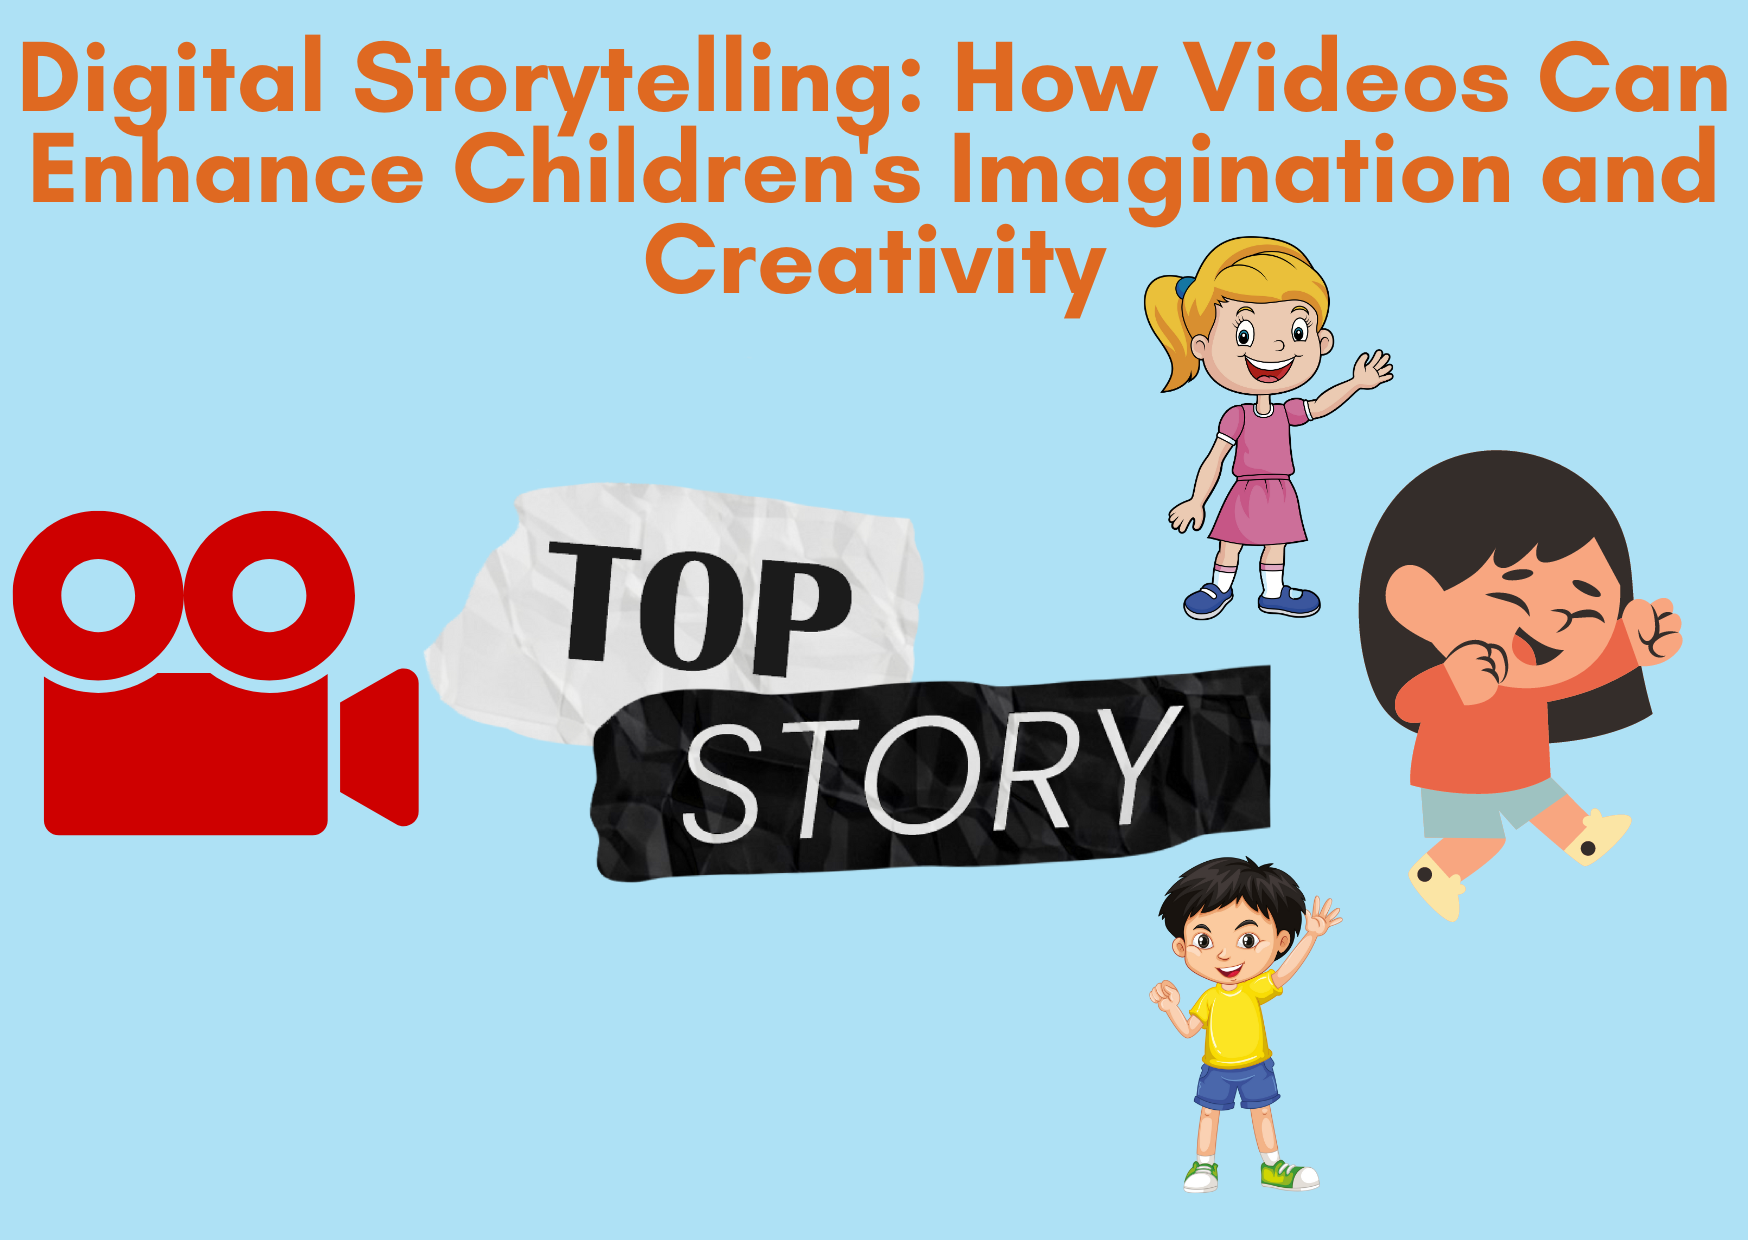 Digital Storytelling: How Videos Can Enhance Children's Imagination and Creativity